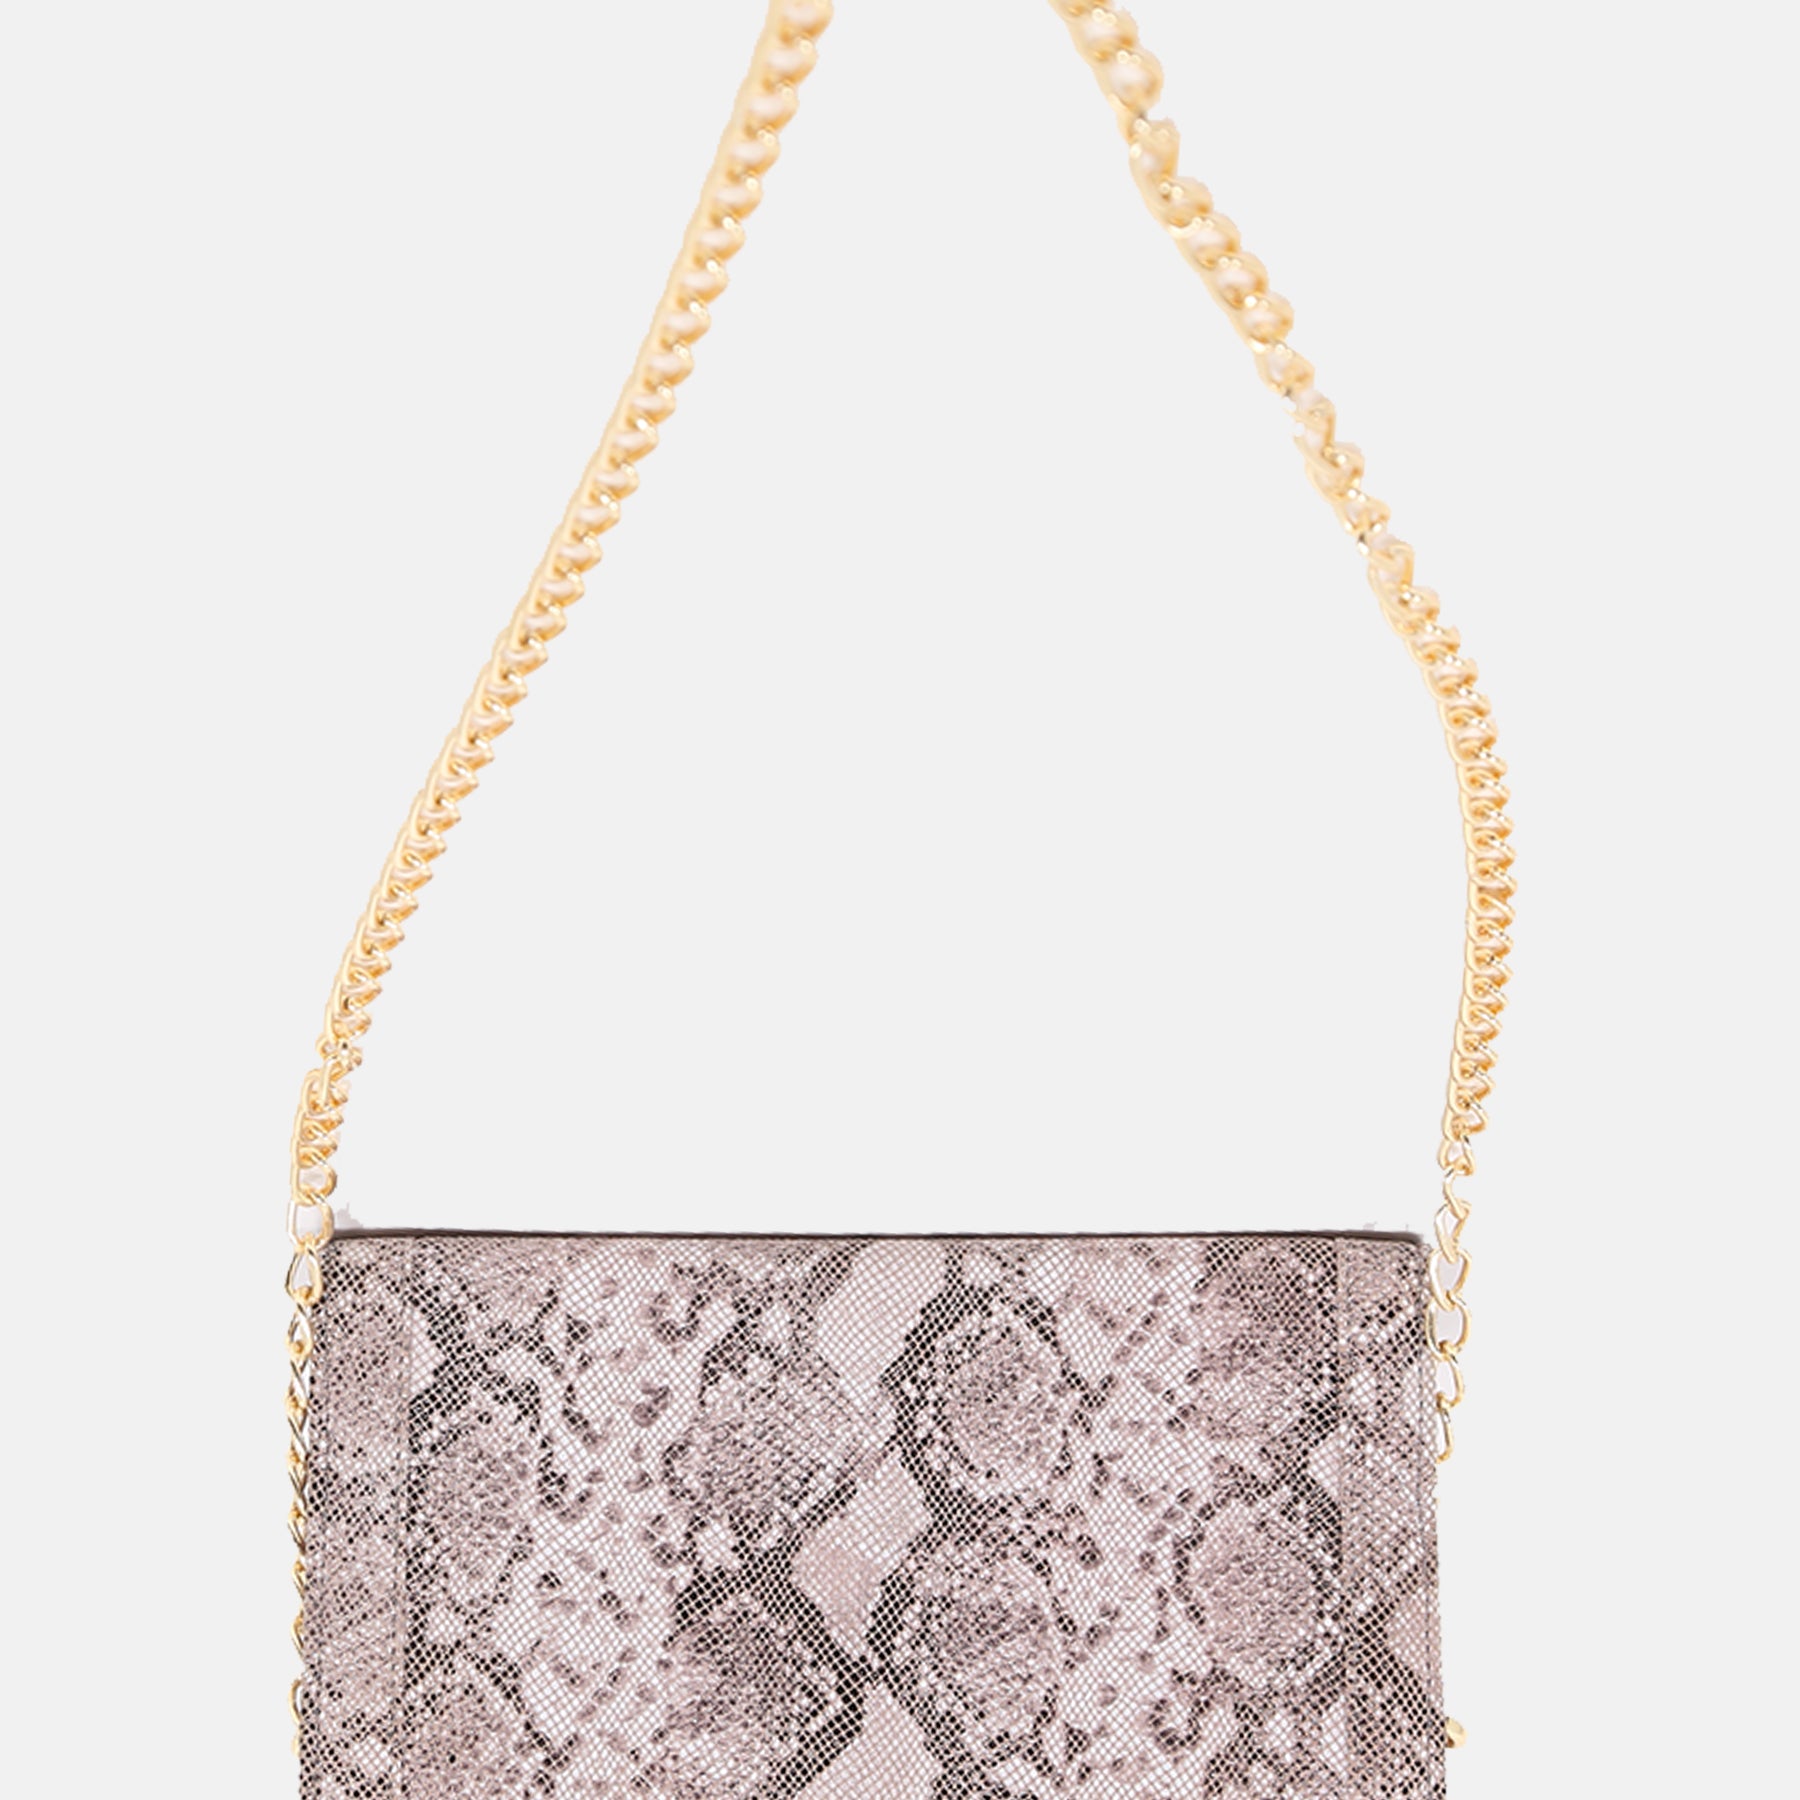 Elegant Clutch Bag with Gold Utility Strap perfect for Elegant city walk and party nights 